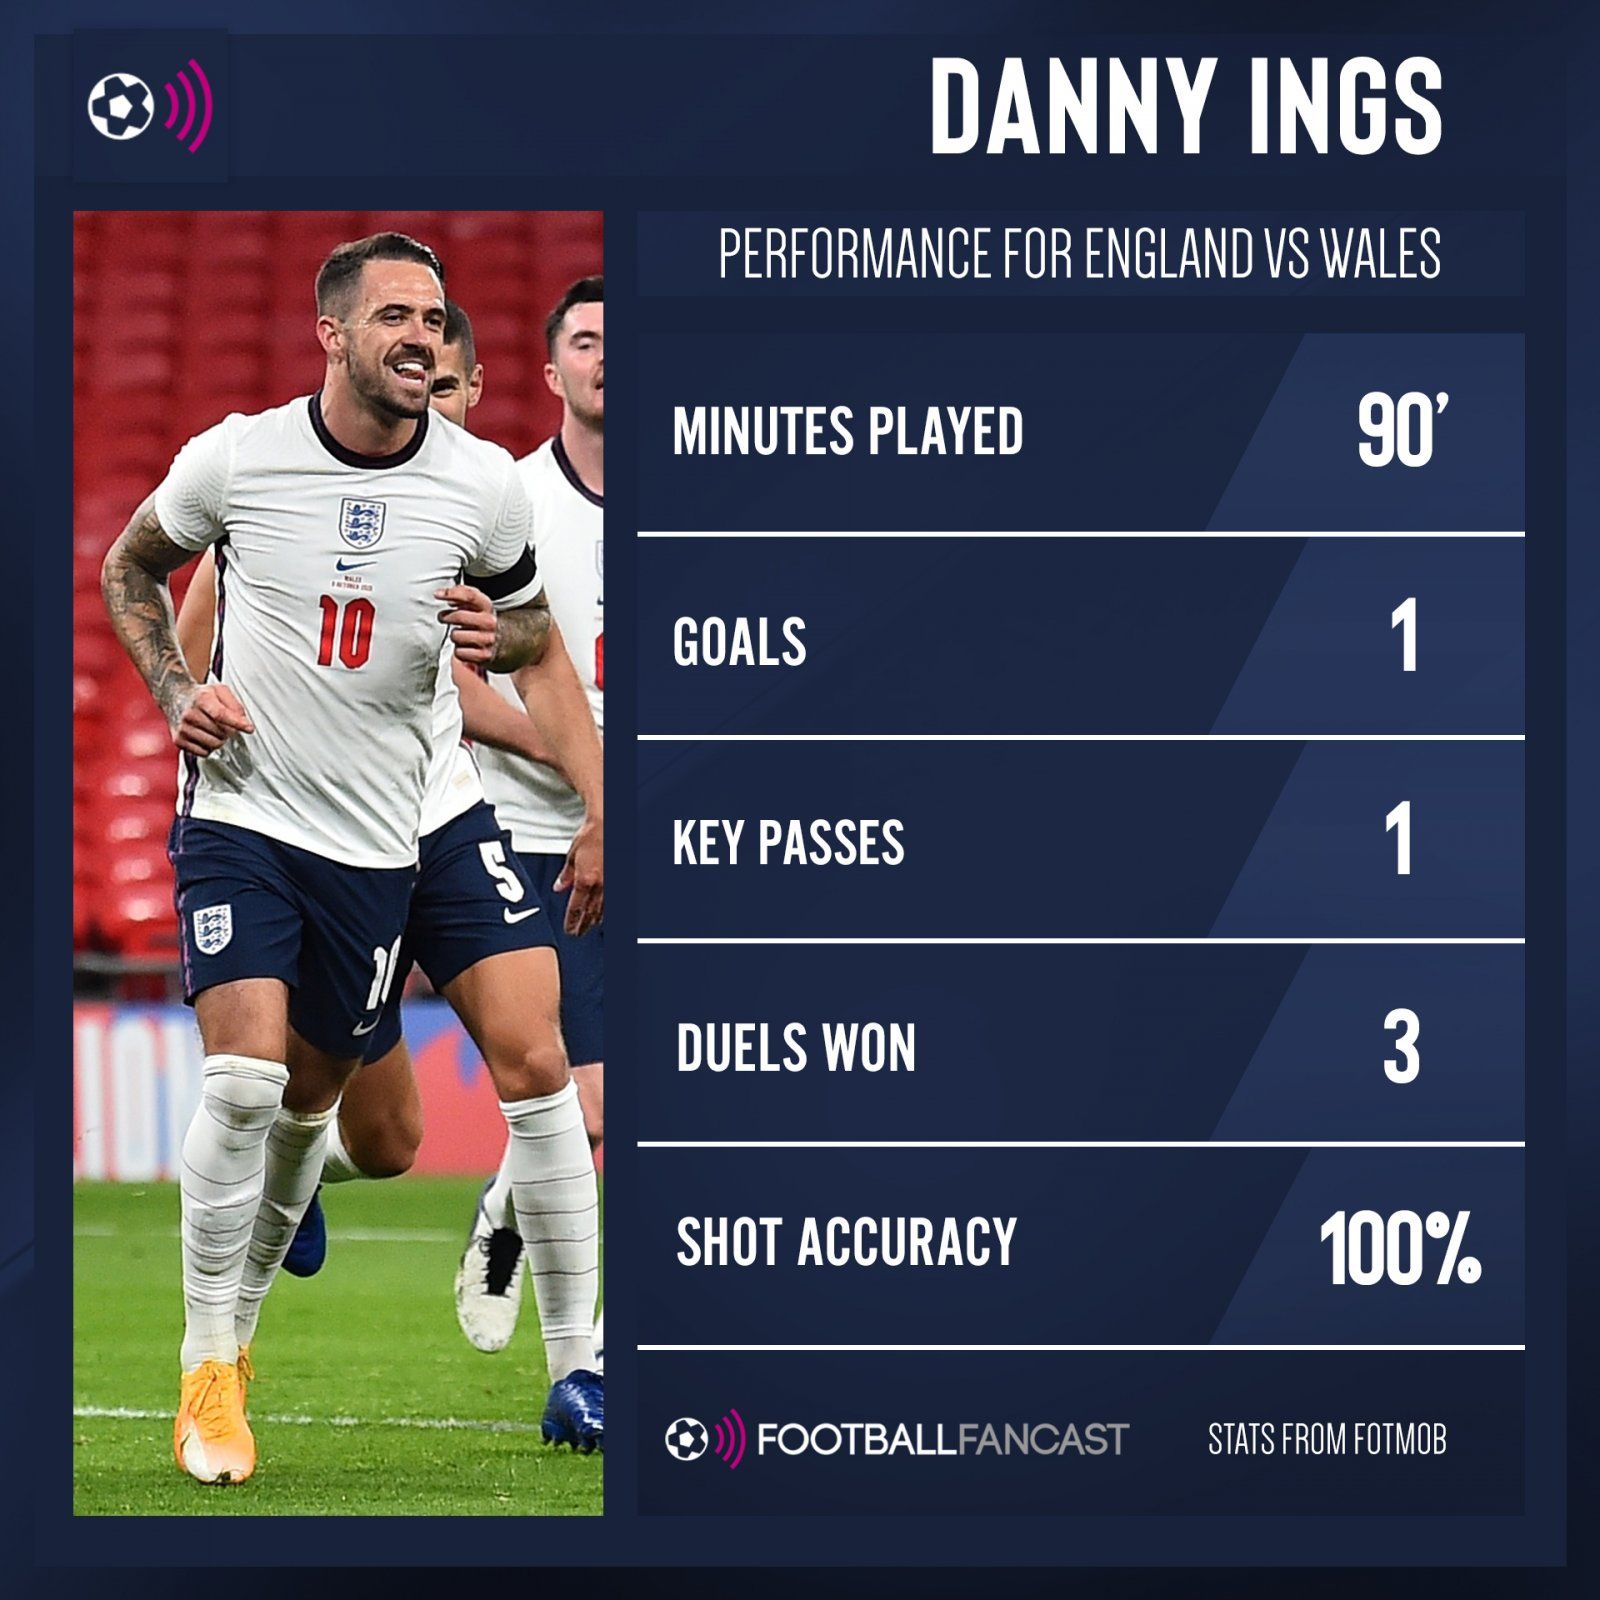 Danny-ings-for-england-vs-wales